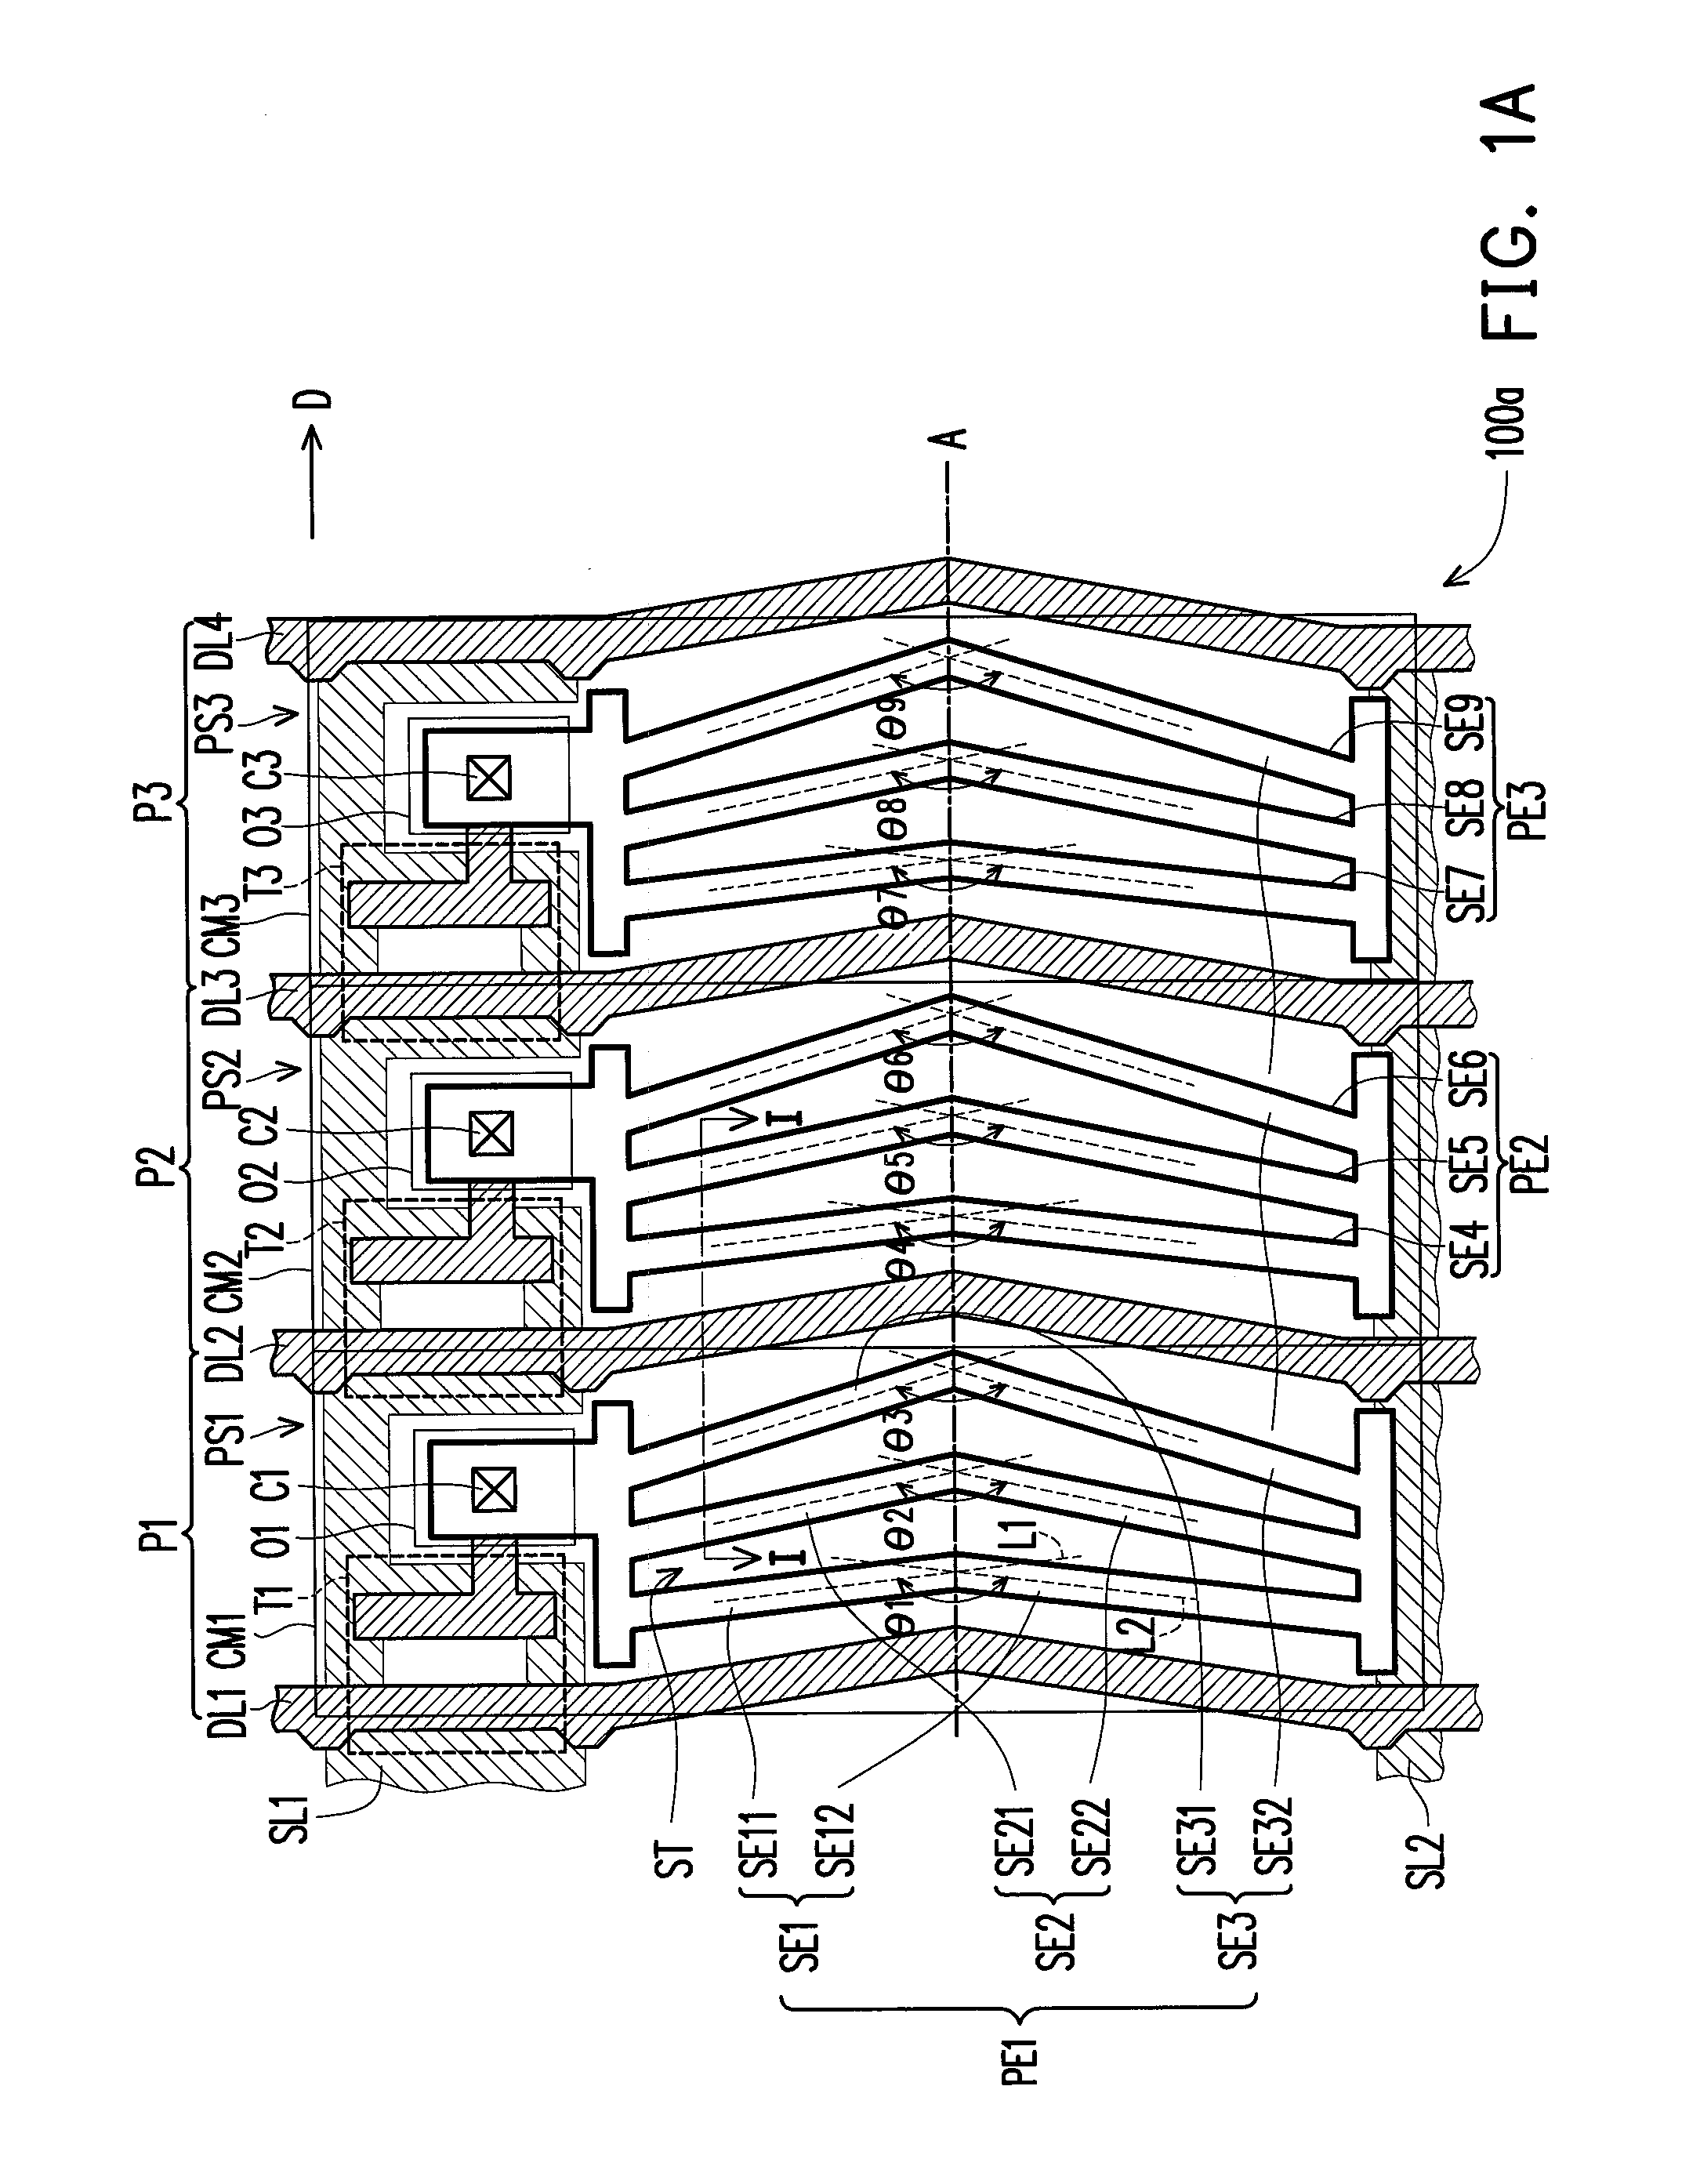 Liquid crystal display panel and pixel structure